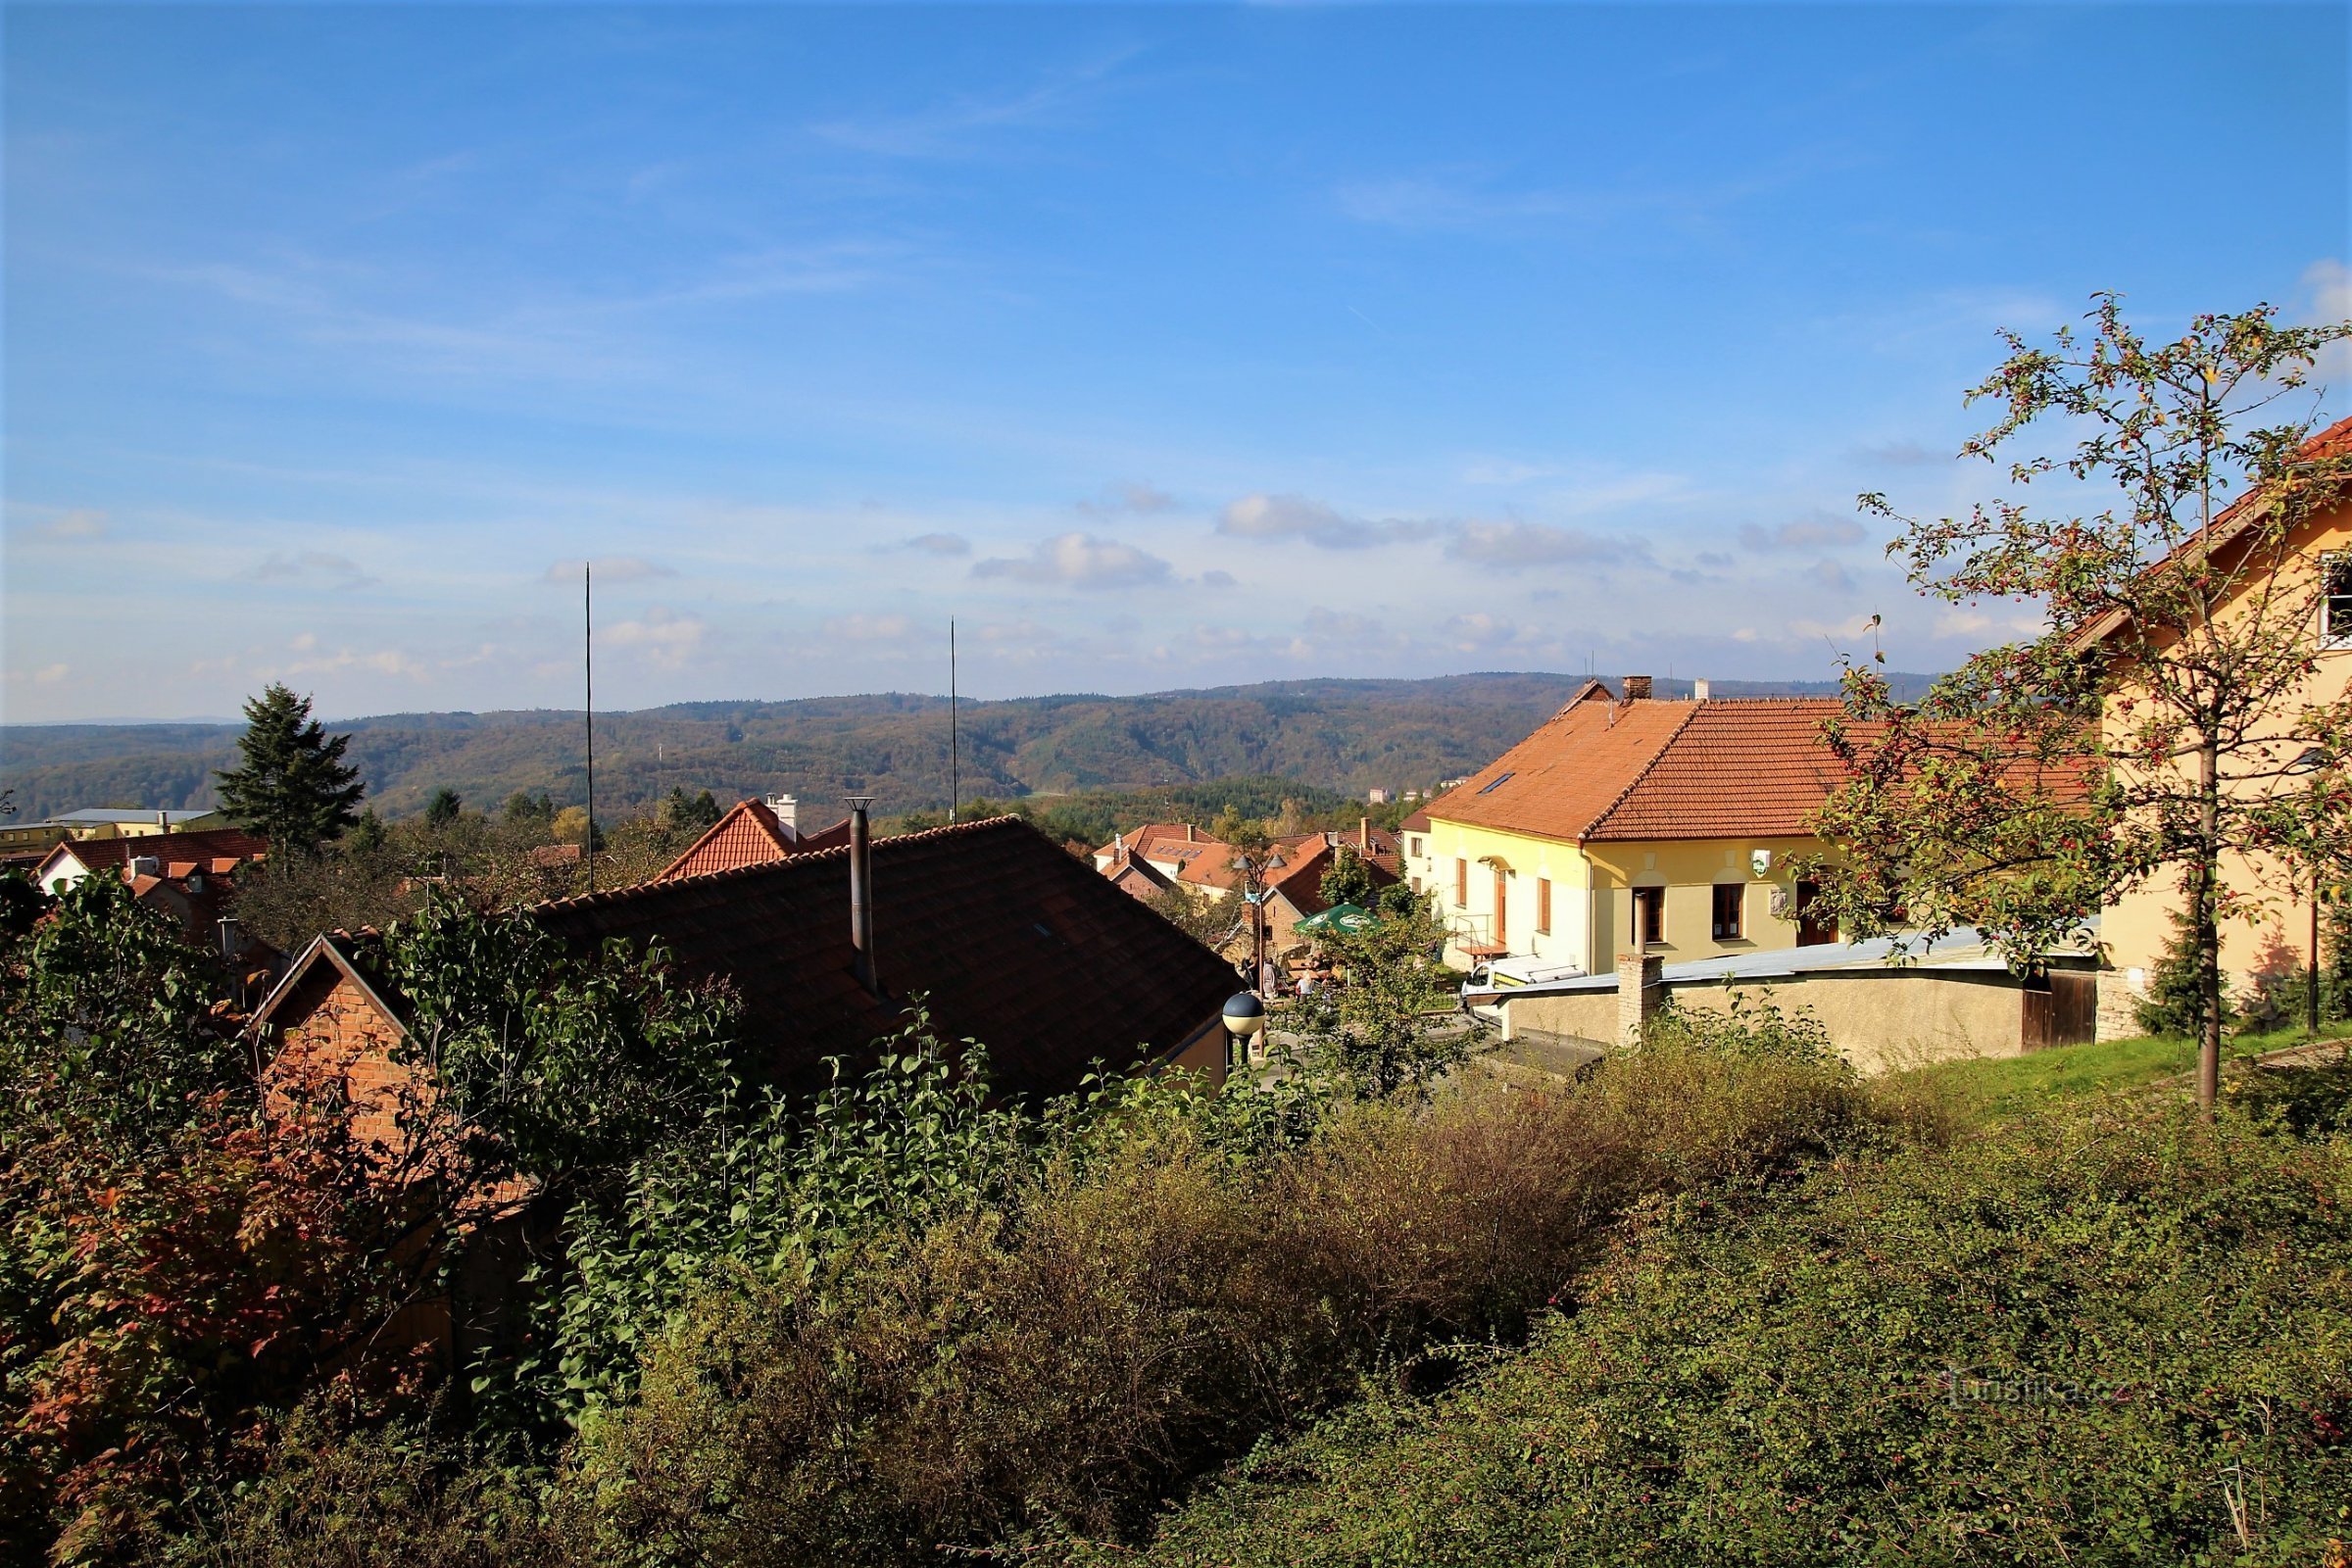 View of the central part of Babice